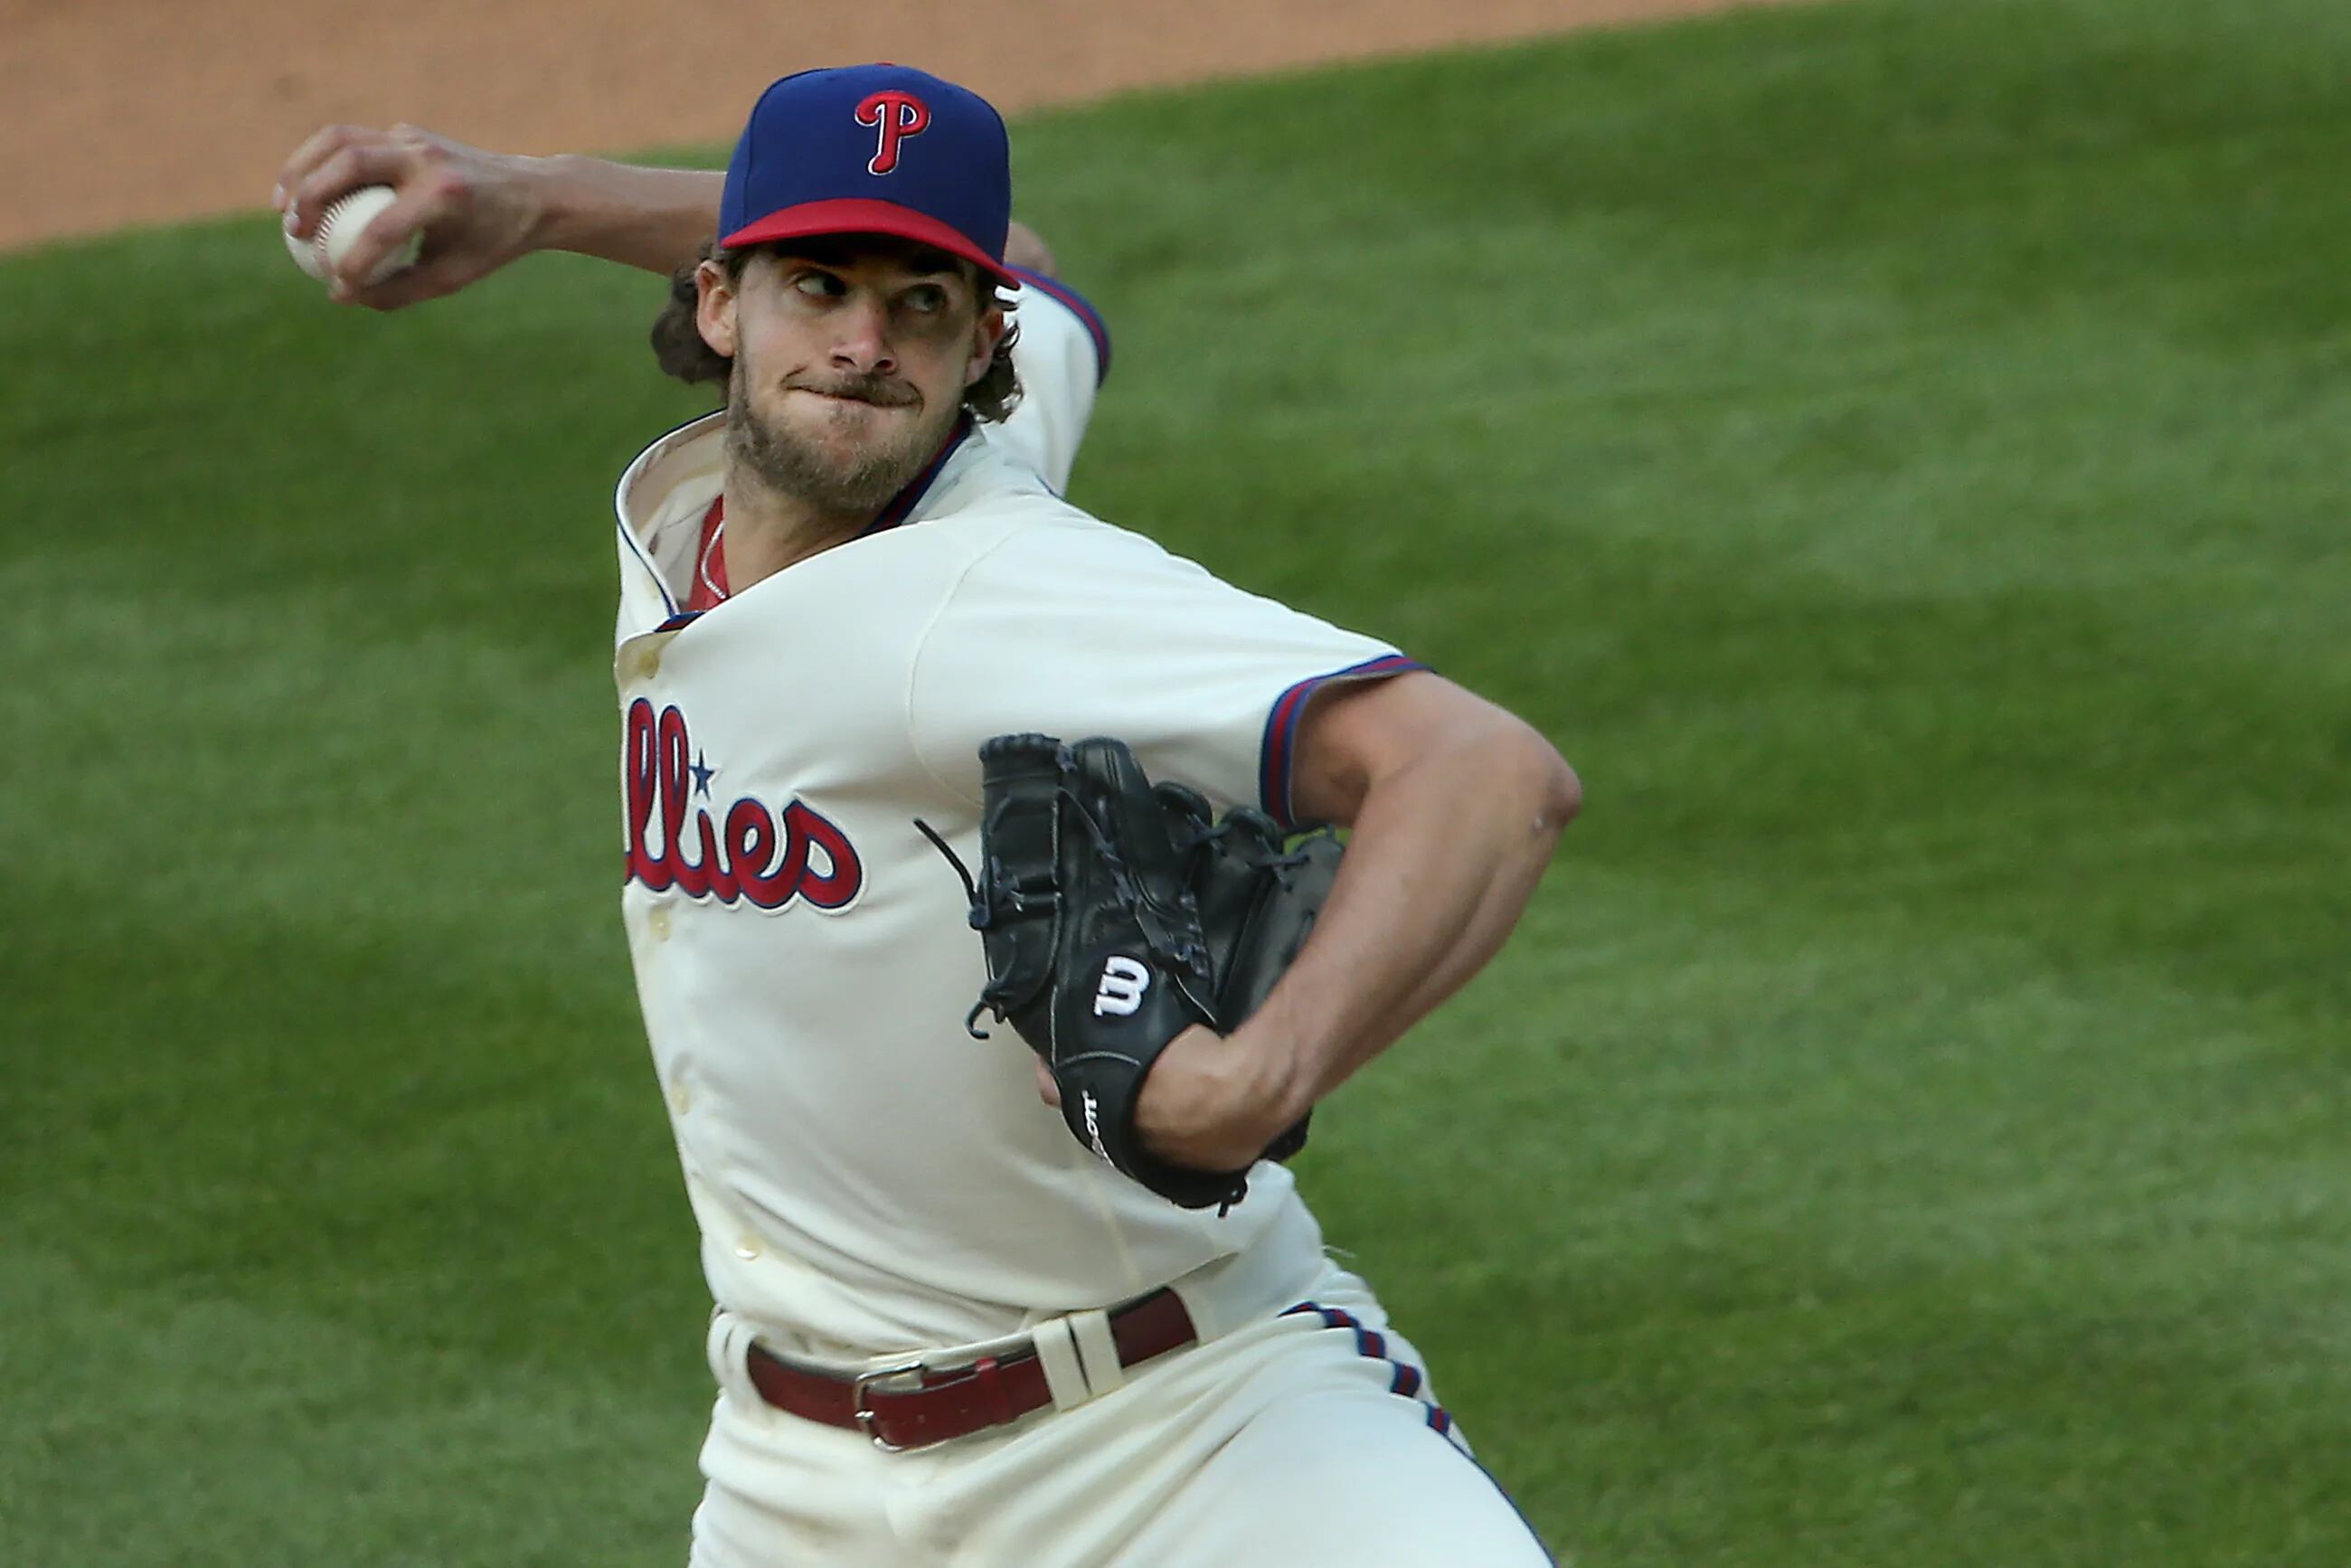 Aaron Nola pitches complete game shutout